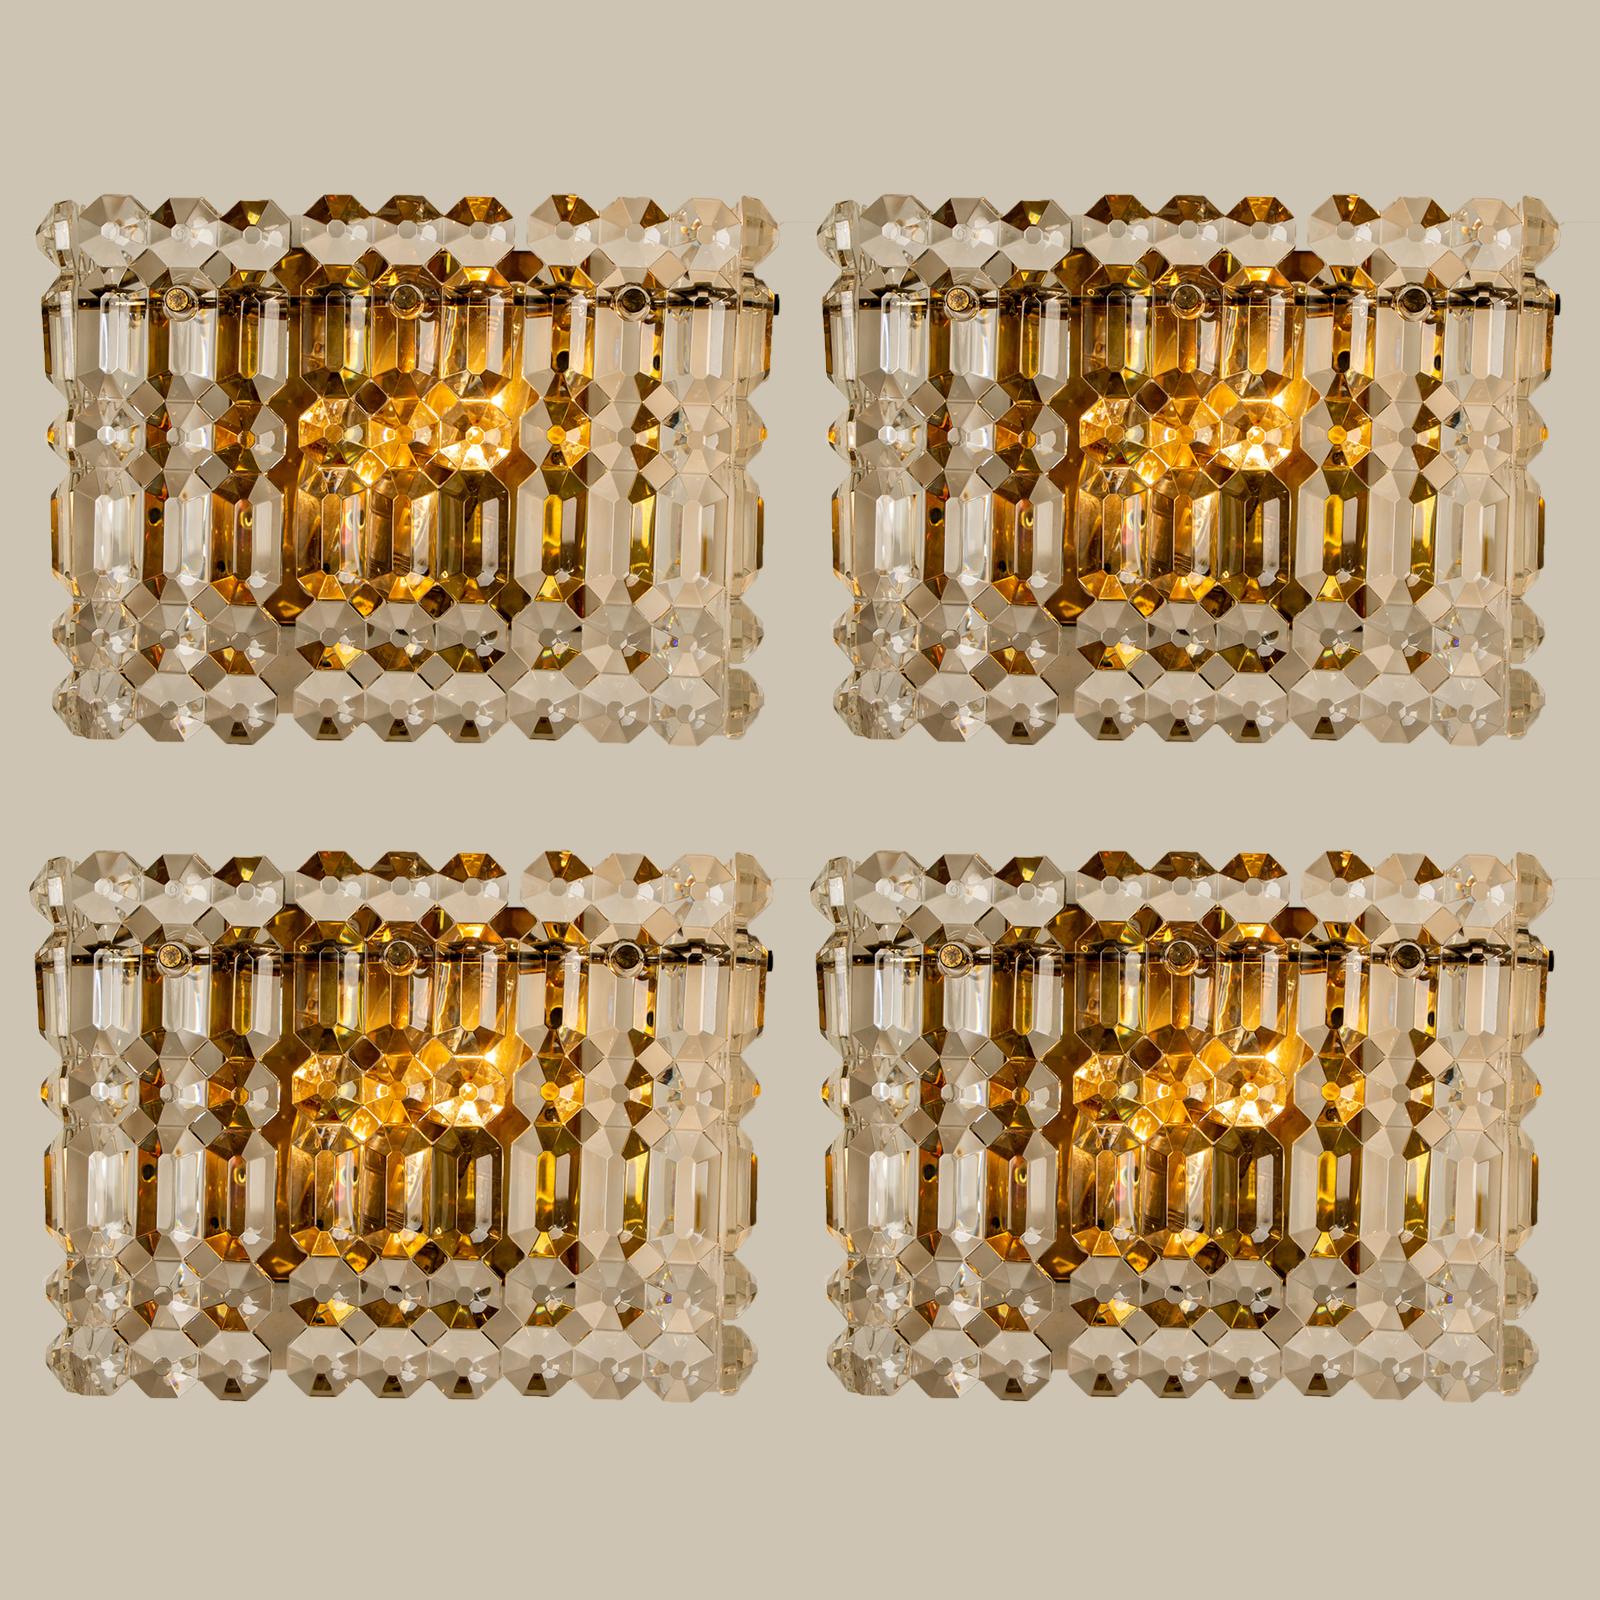 One of the eight luxurious gold-plated frames and thick crystal sconces by the famed maker, Kinkeldey. Two-light sources. Very elegant light fixtures, comfortable with all decor periods. The crystals are meticulously cut in such a way that radiate